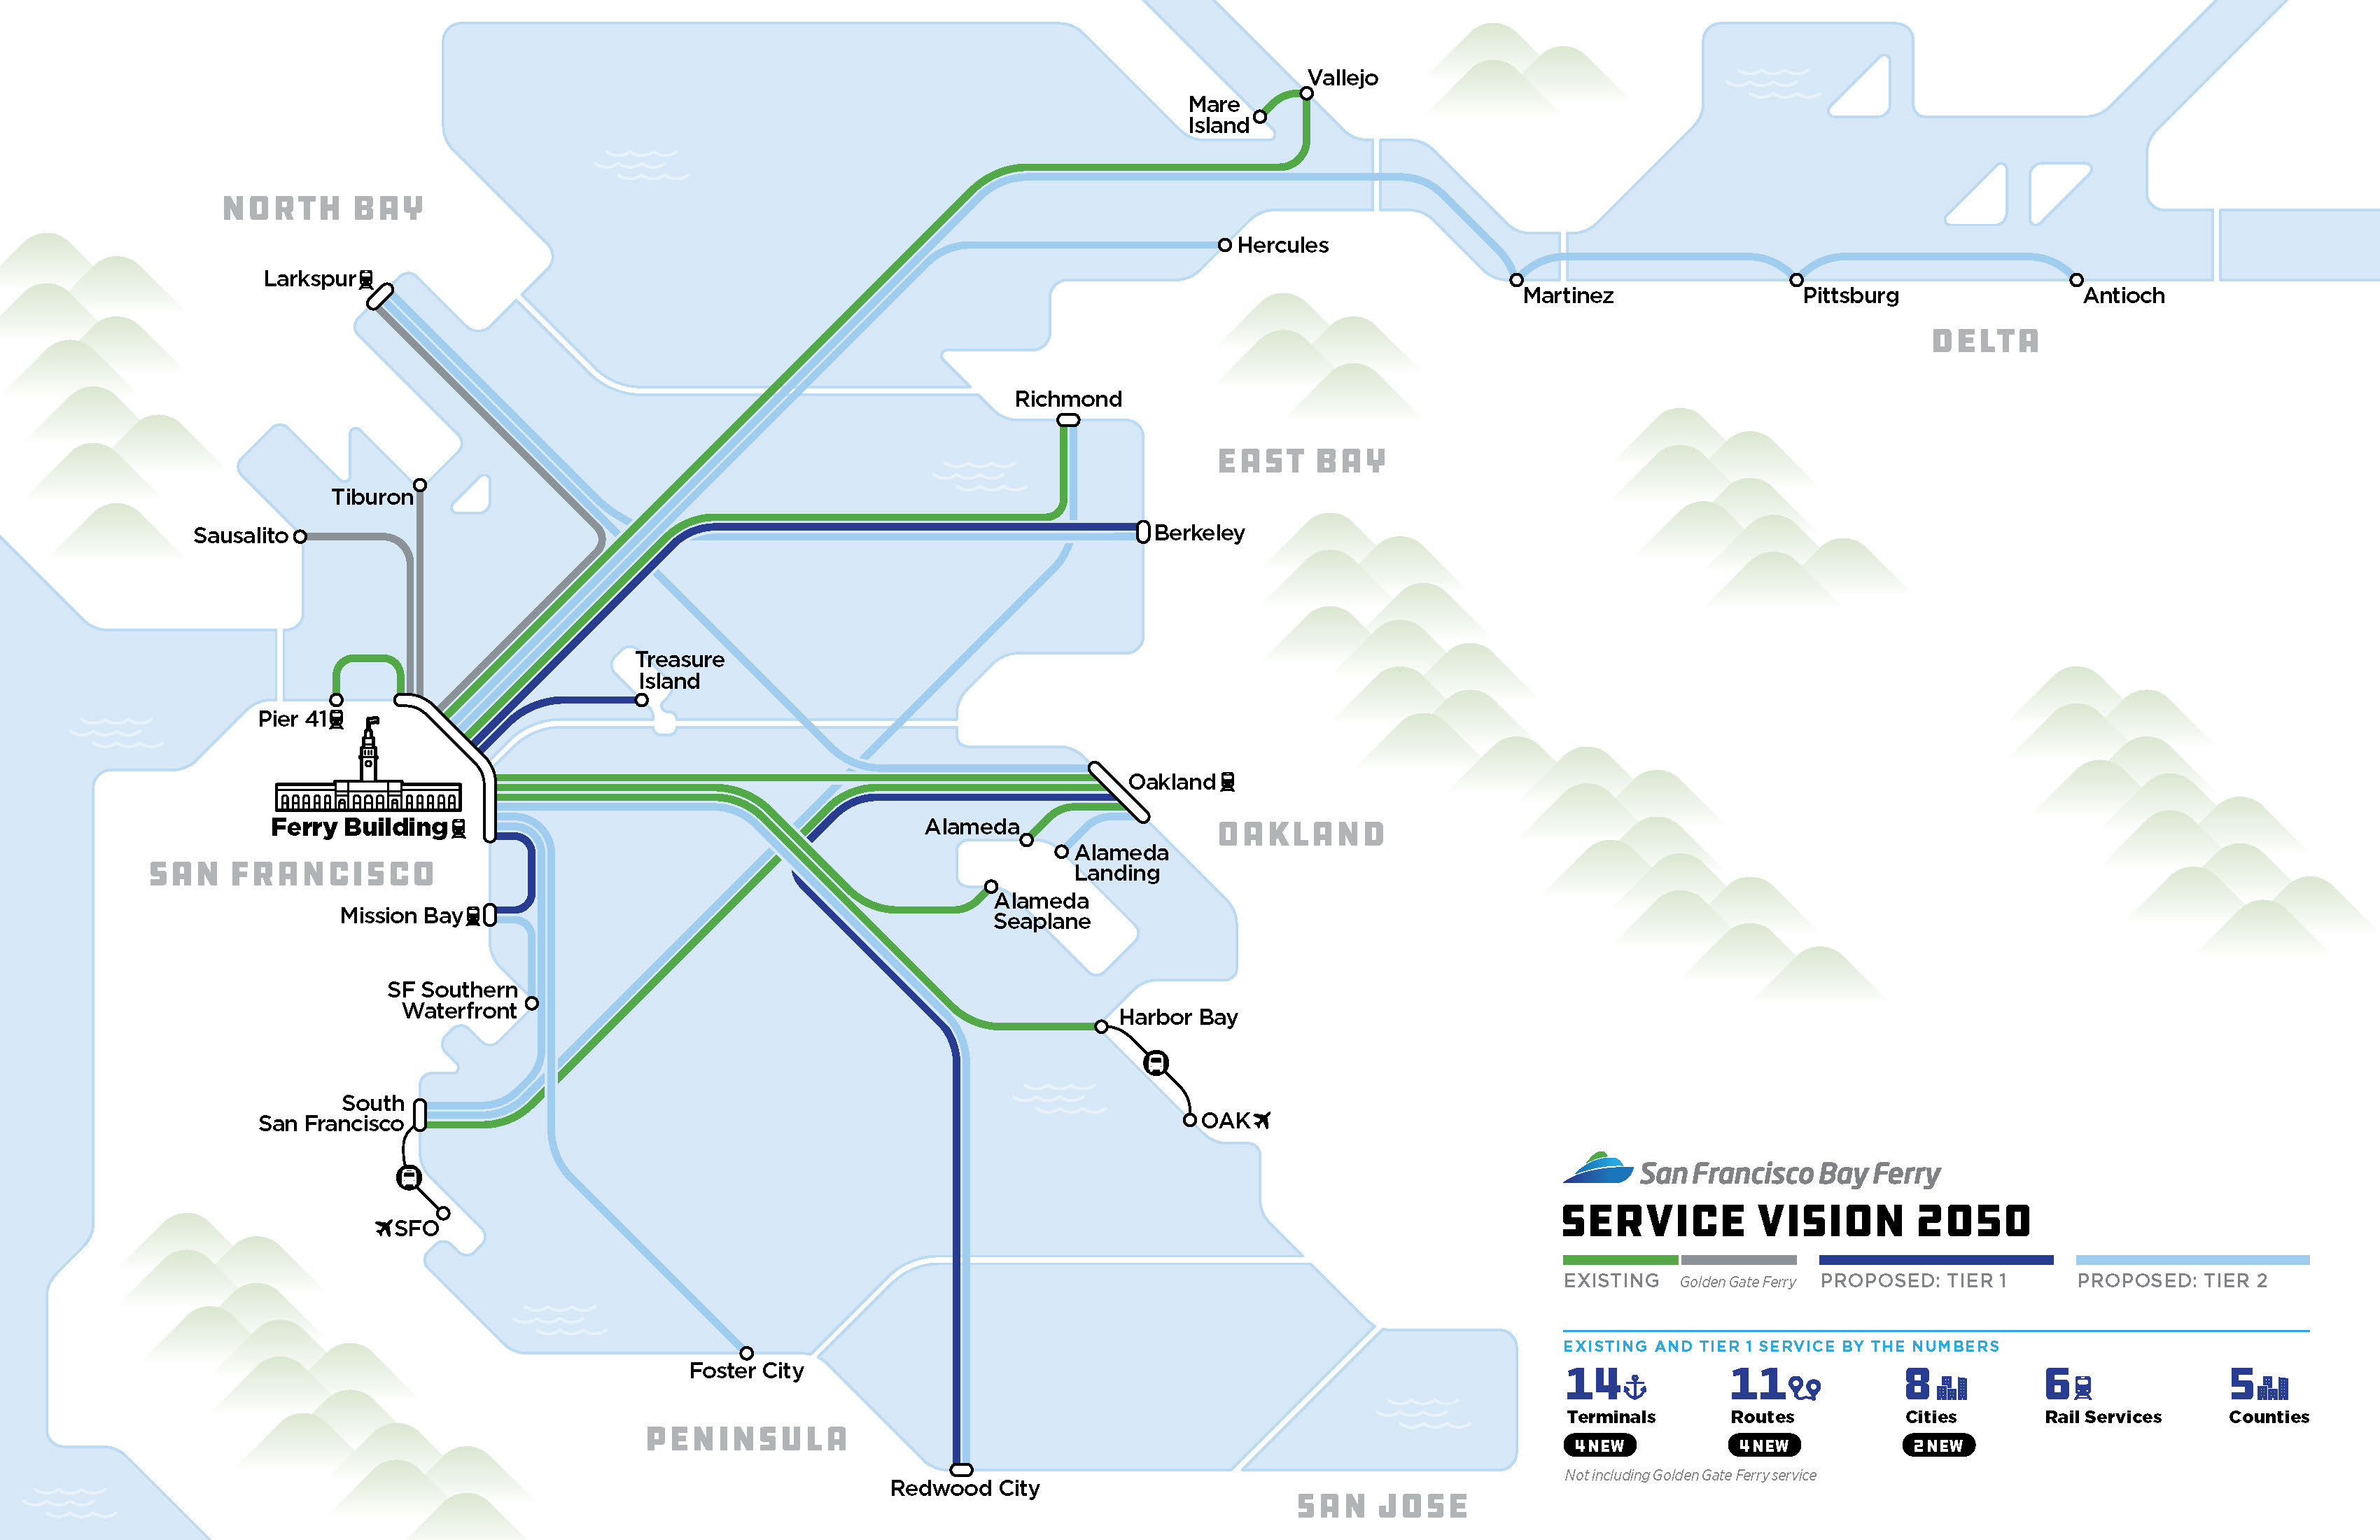 A map showing the San Francisco Bay Ferry's proposed routes with symbols for terminals and routes.